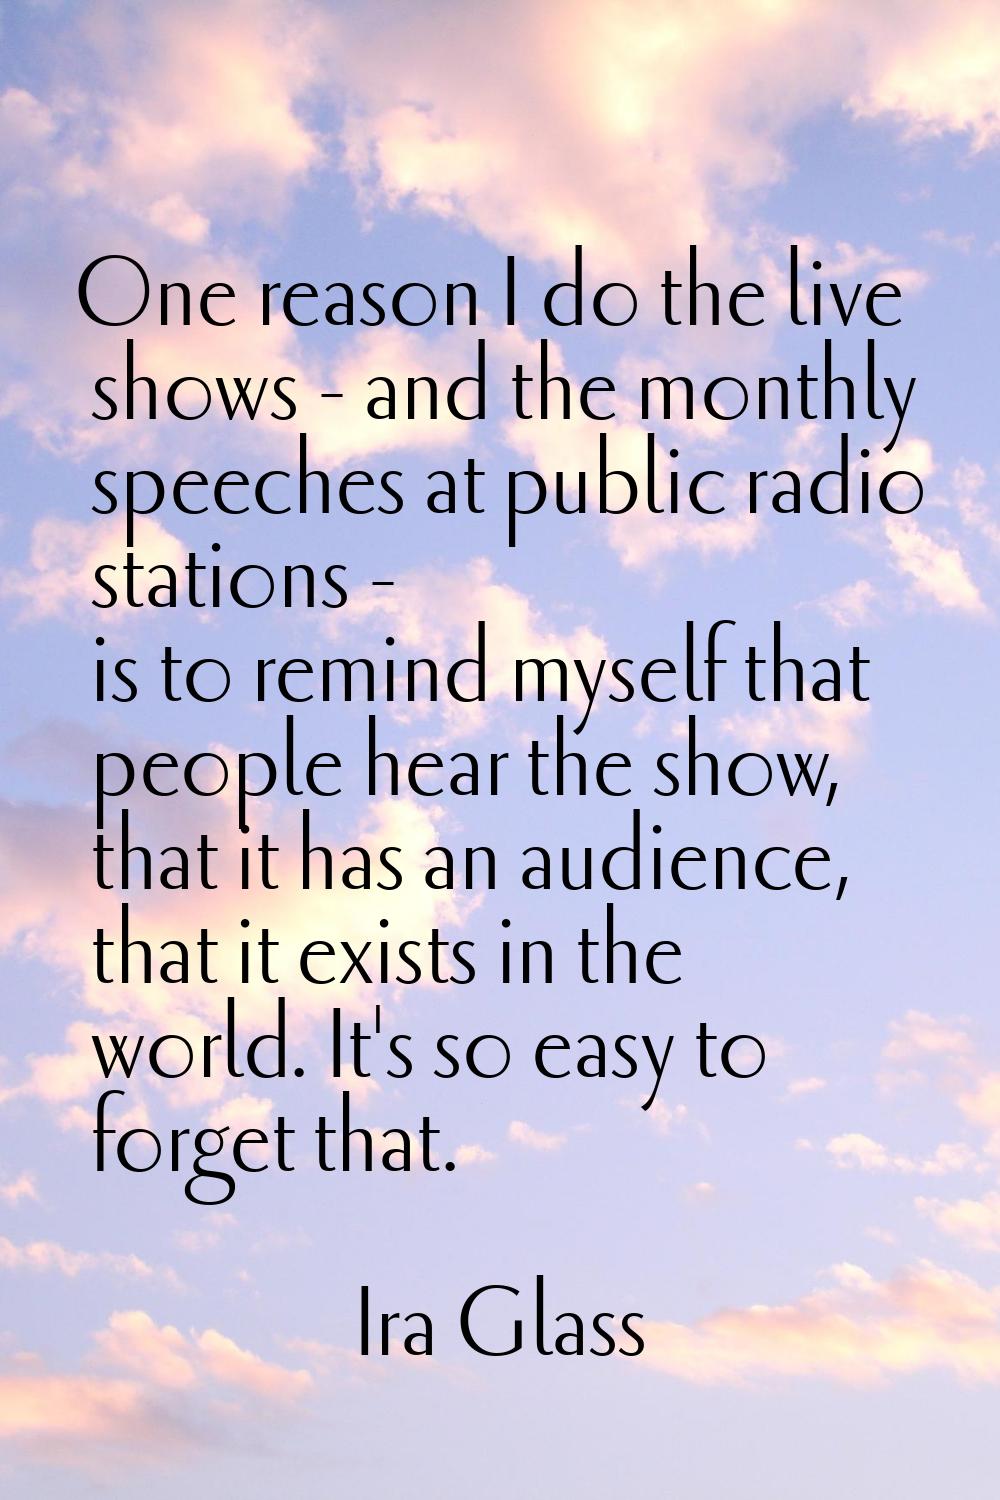 One reason I do the live shows - and the monthly speeches at public radio stations - is to remind m